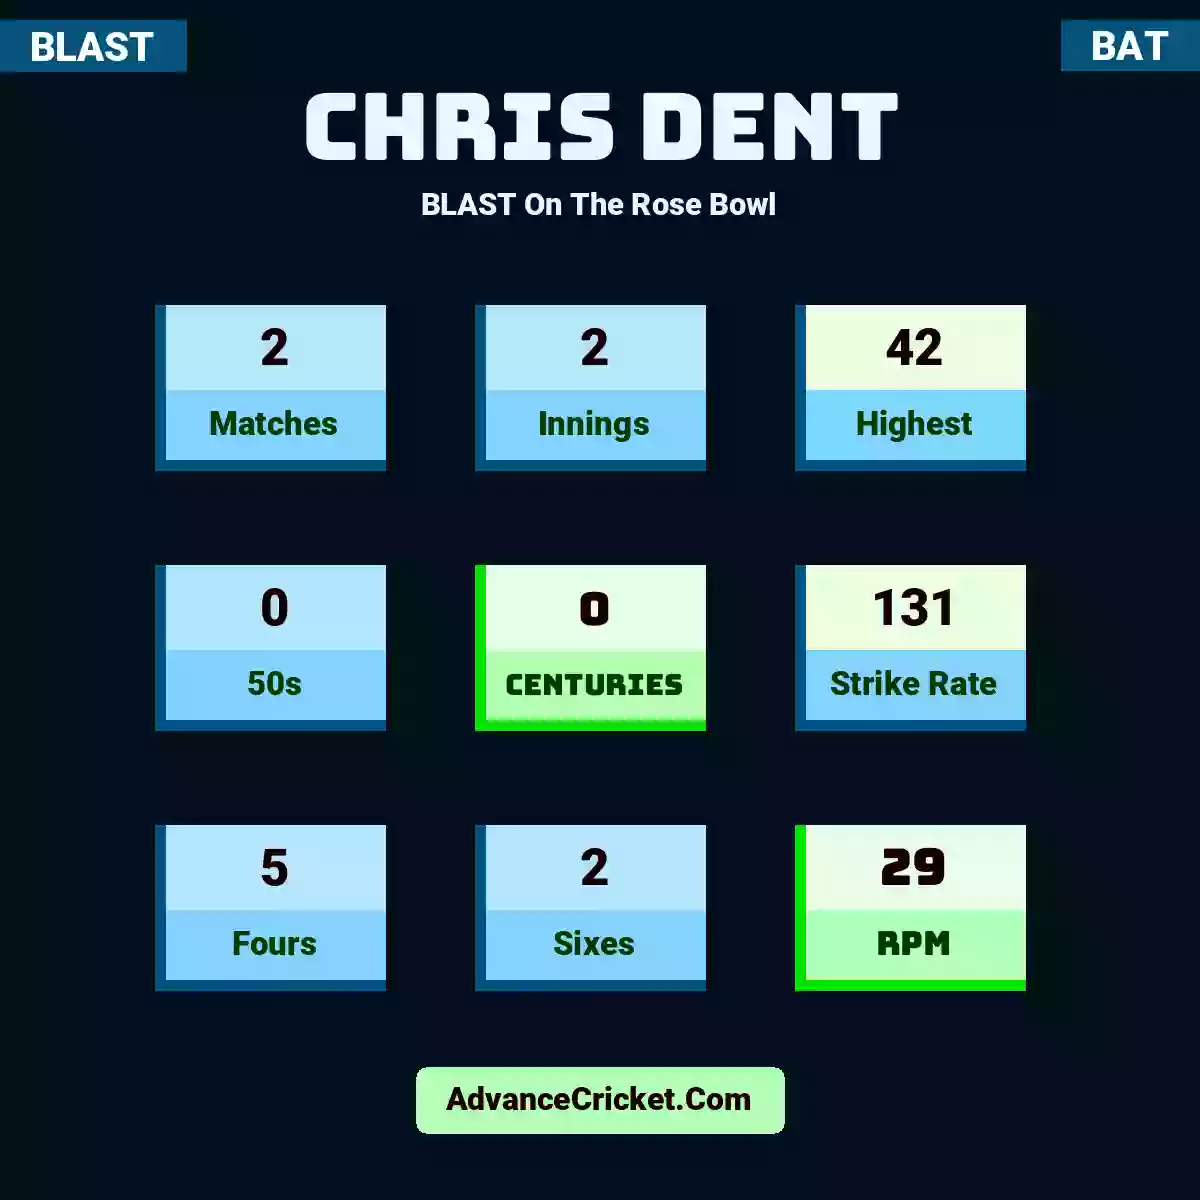 Chris Dent BLAST  On The Rose Bowl, Chris Dent played 2 matches, scored 42 runs as highest, 0 half-centuries, and 0 centuries, with a strike rate of 131. C.Dent hit 5 fours and 2 sixes, with an RPM of 29.